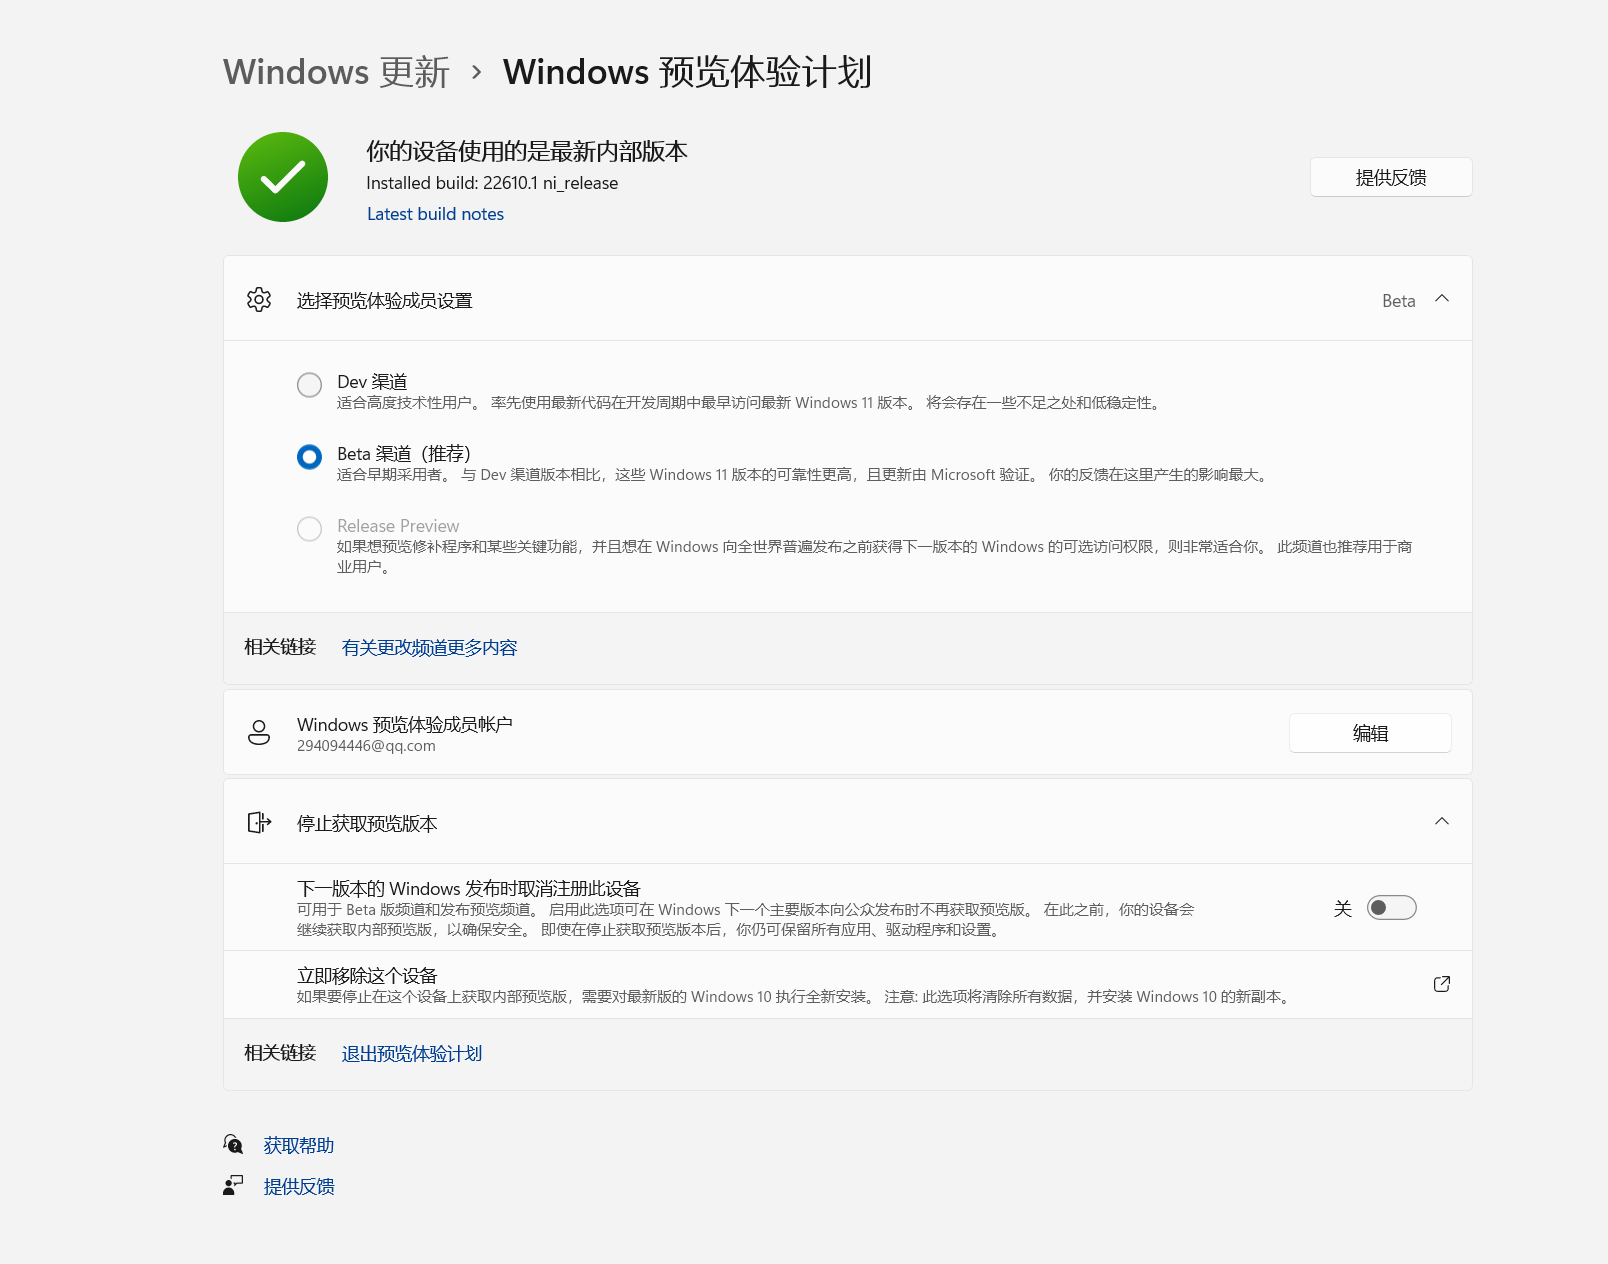 win11 Windows预览体验计划 可以从Beta 改到 Release Preview 吗？